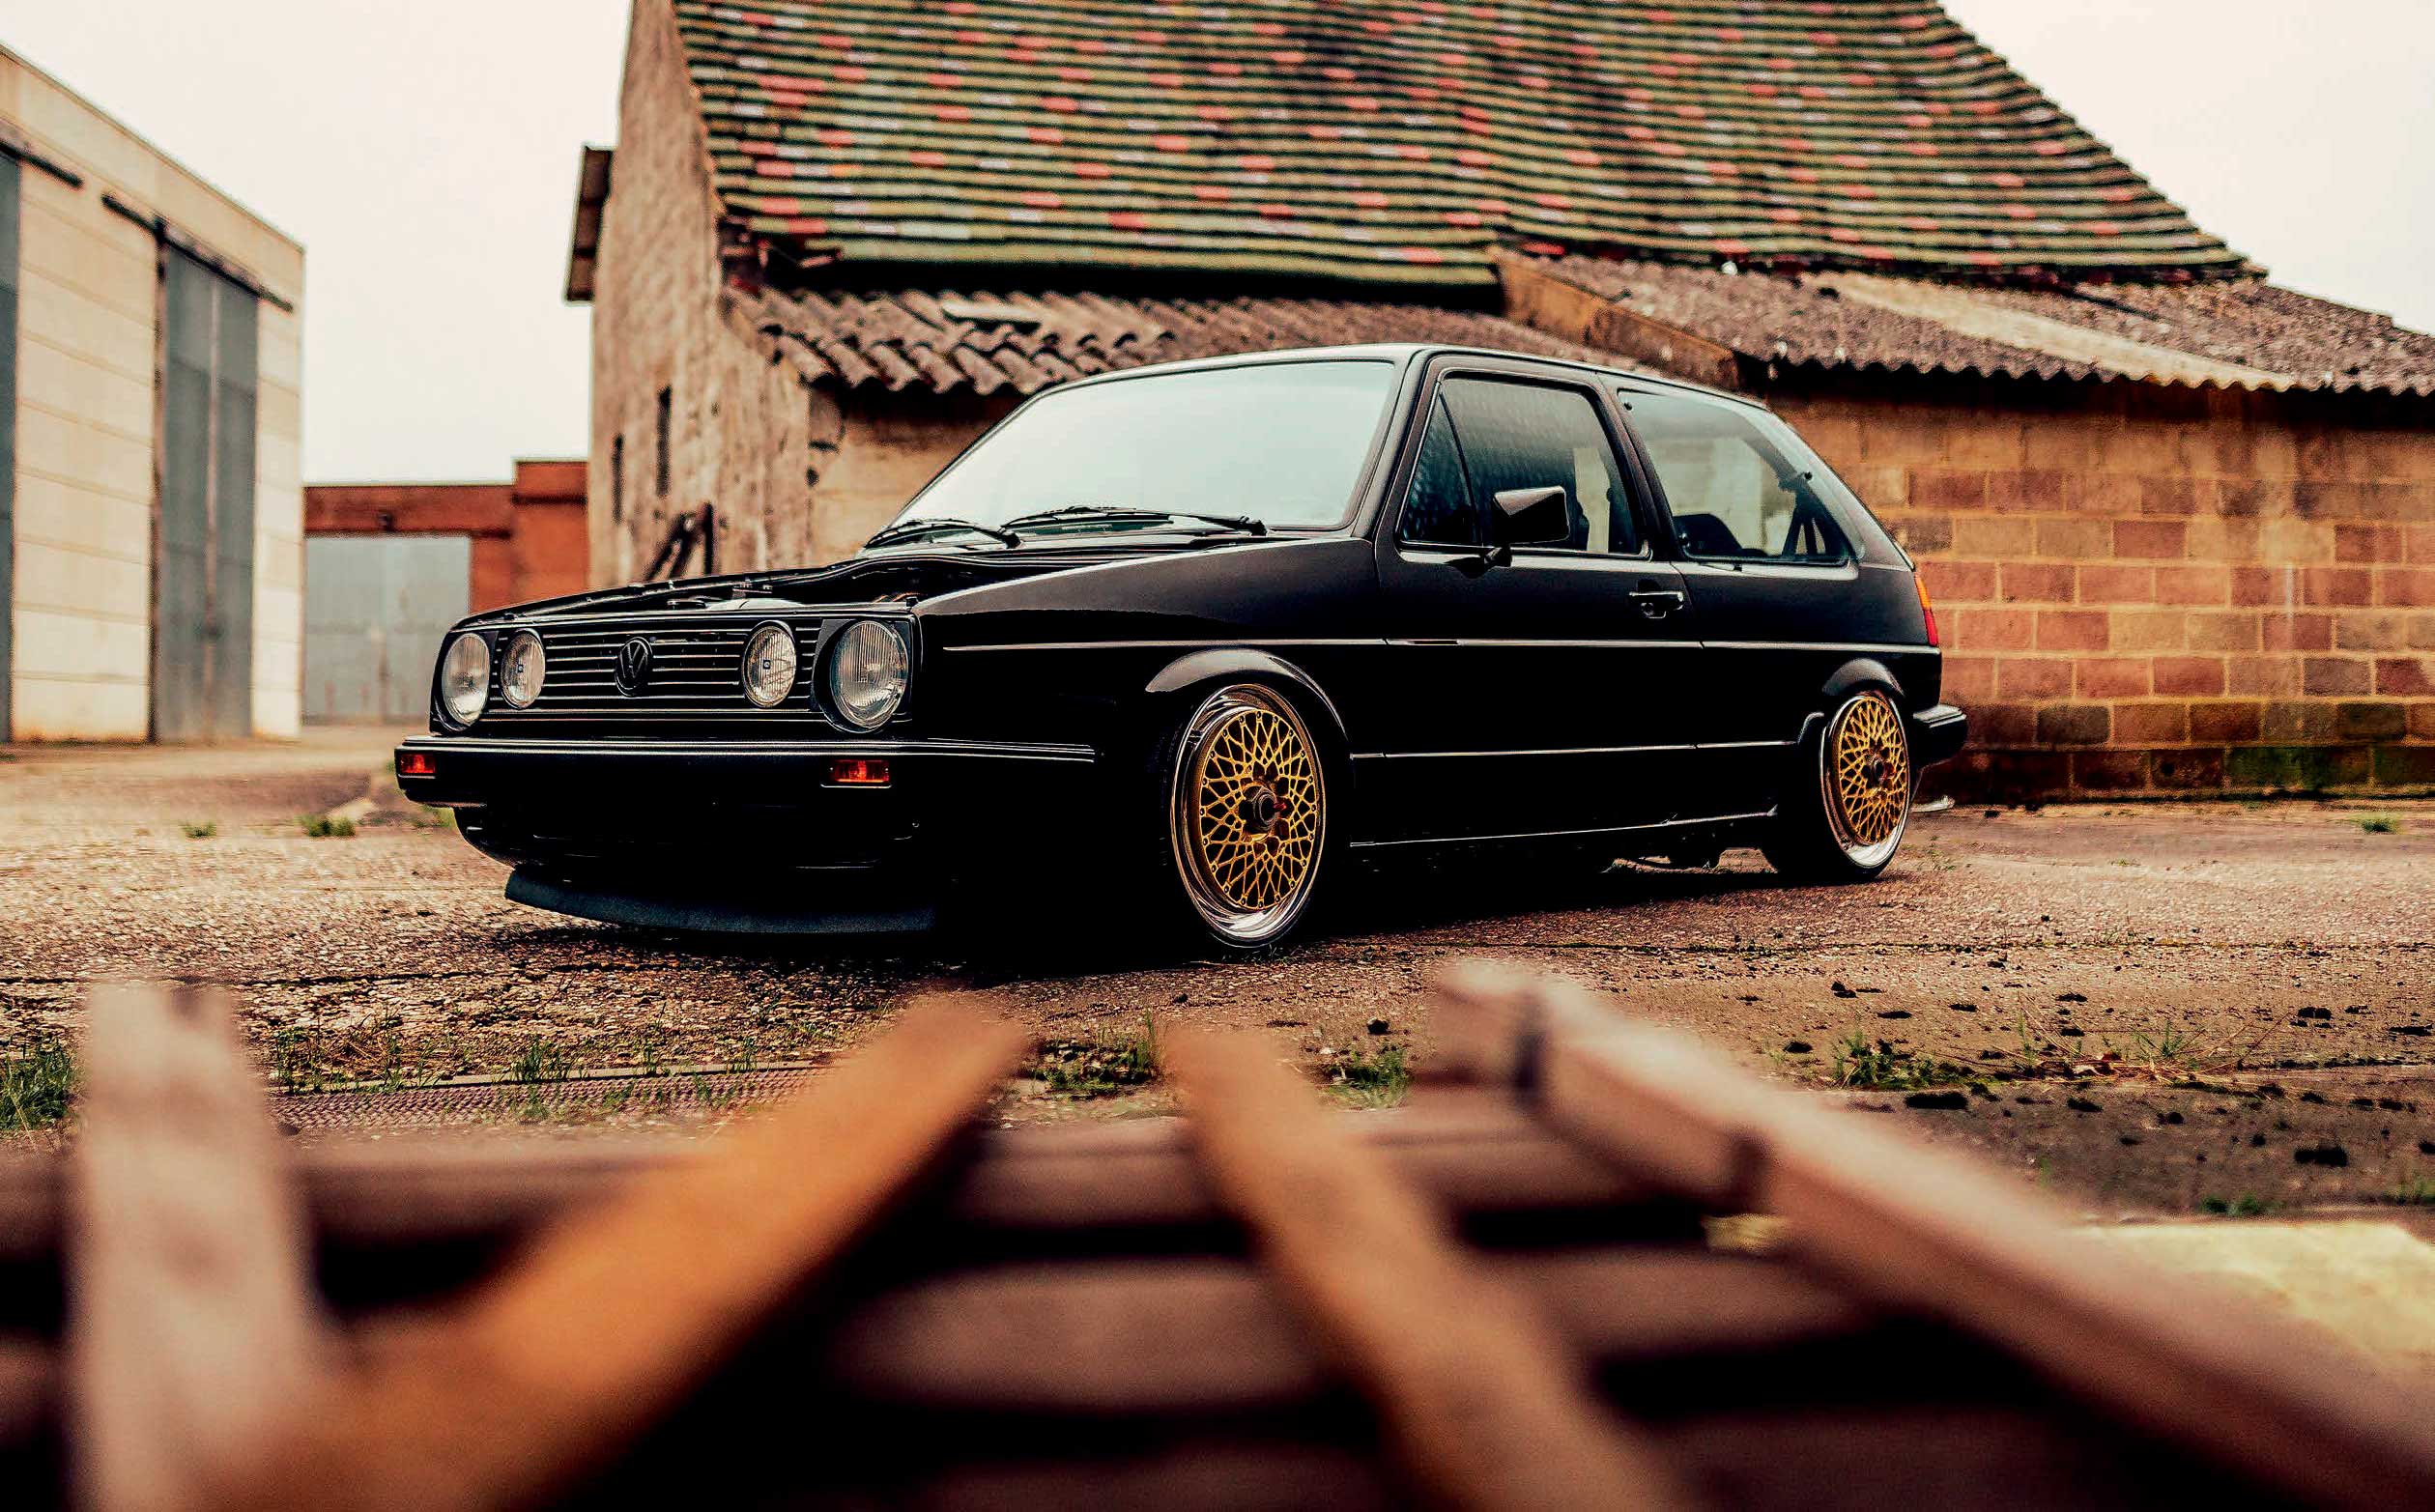 VW Golf Mk2 Tuning Pictures